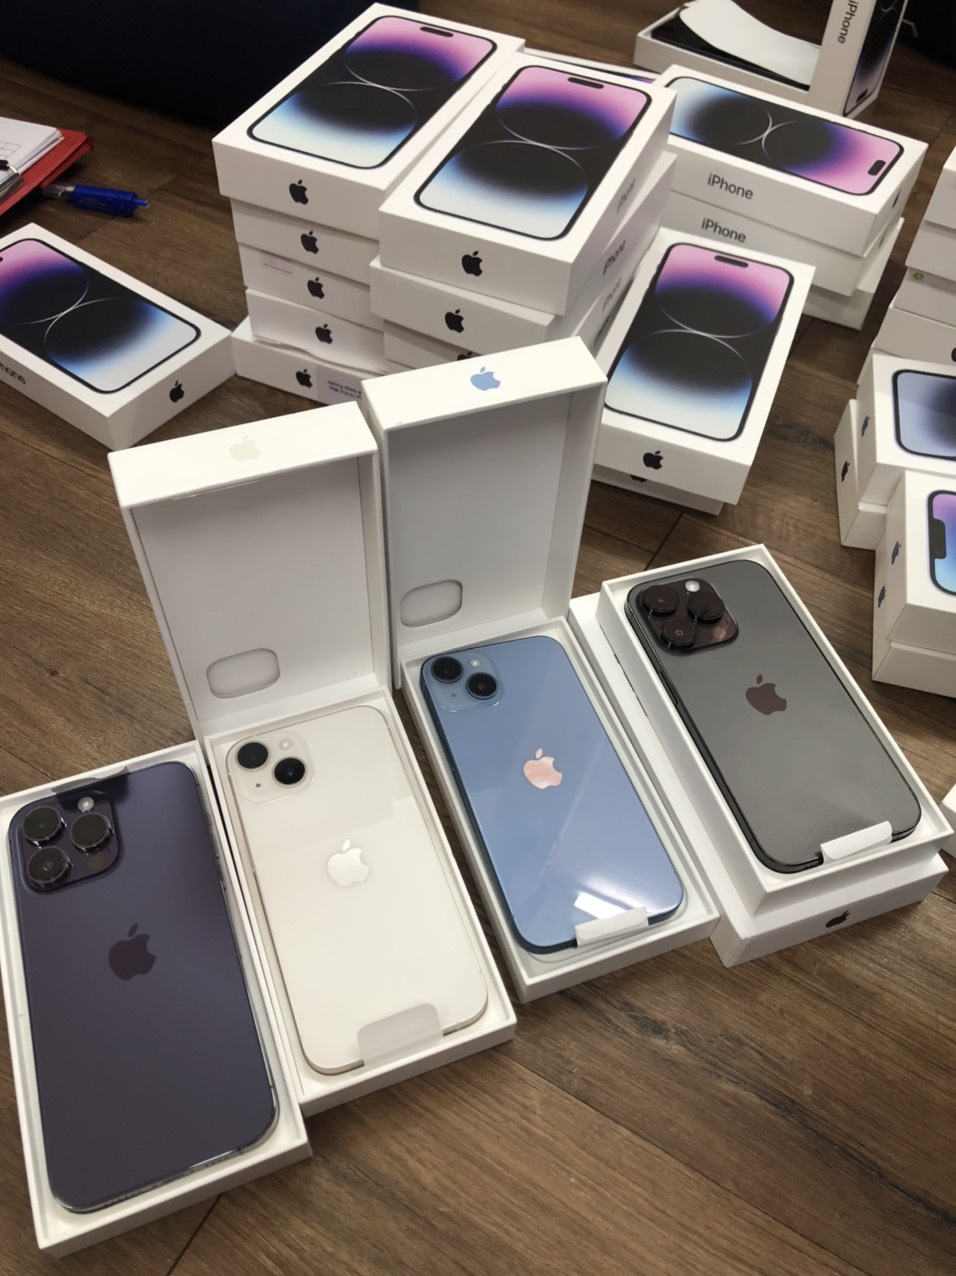 Ho Chi Minh City: Discovered suitcase containing dozens of iPhone 14 suspected of being smuggled - Photo 2.